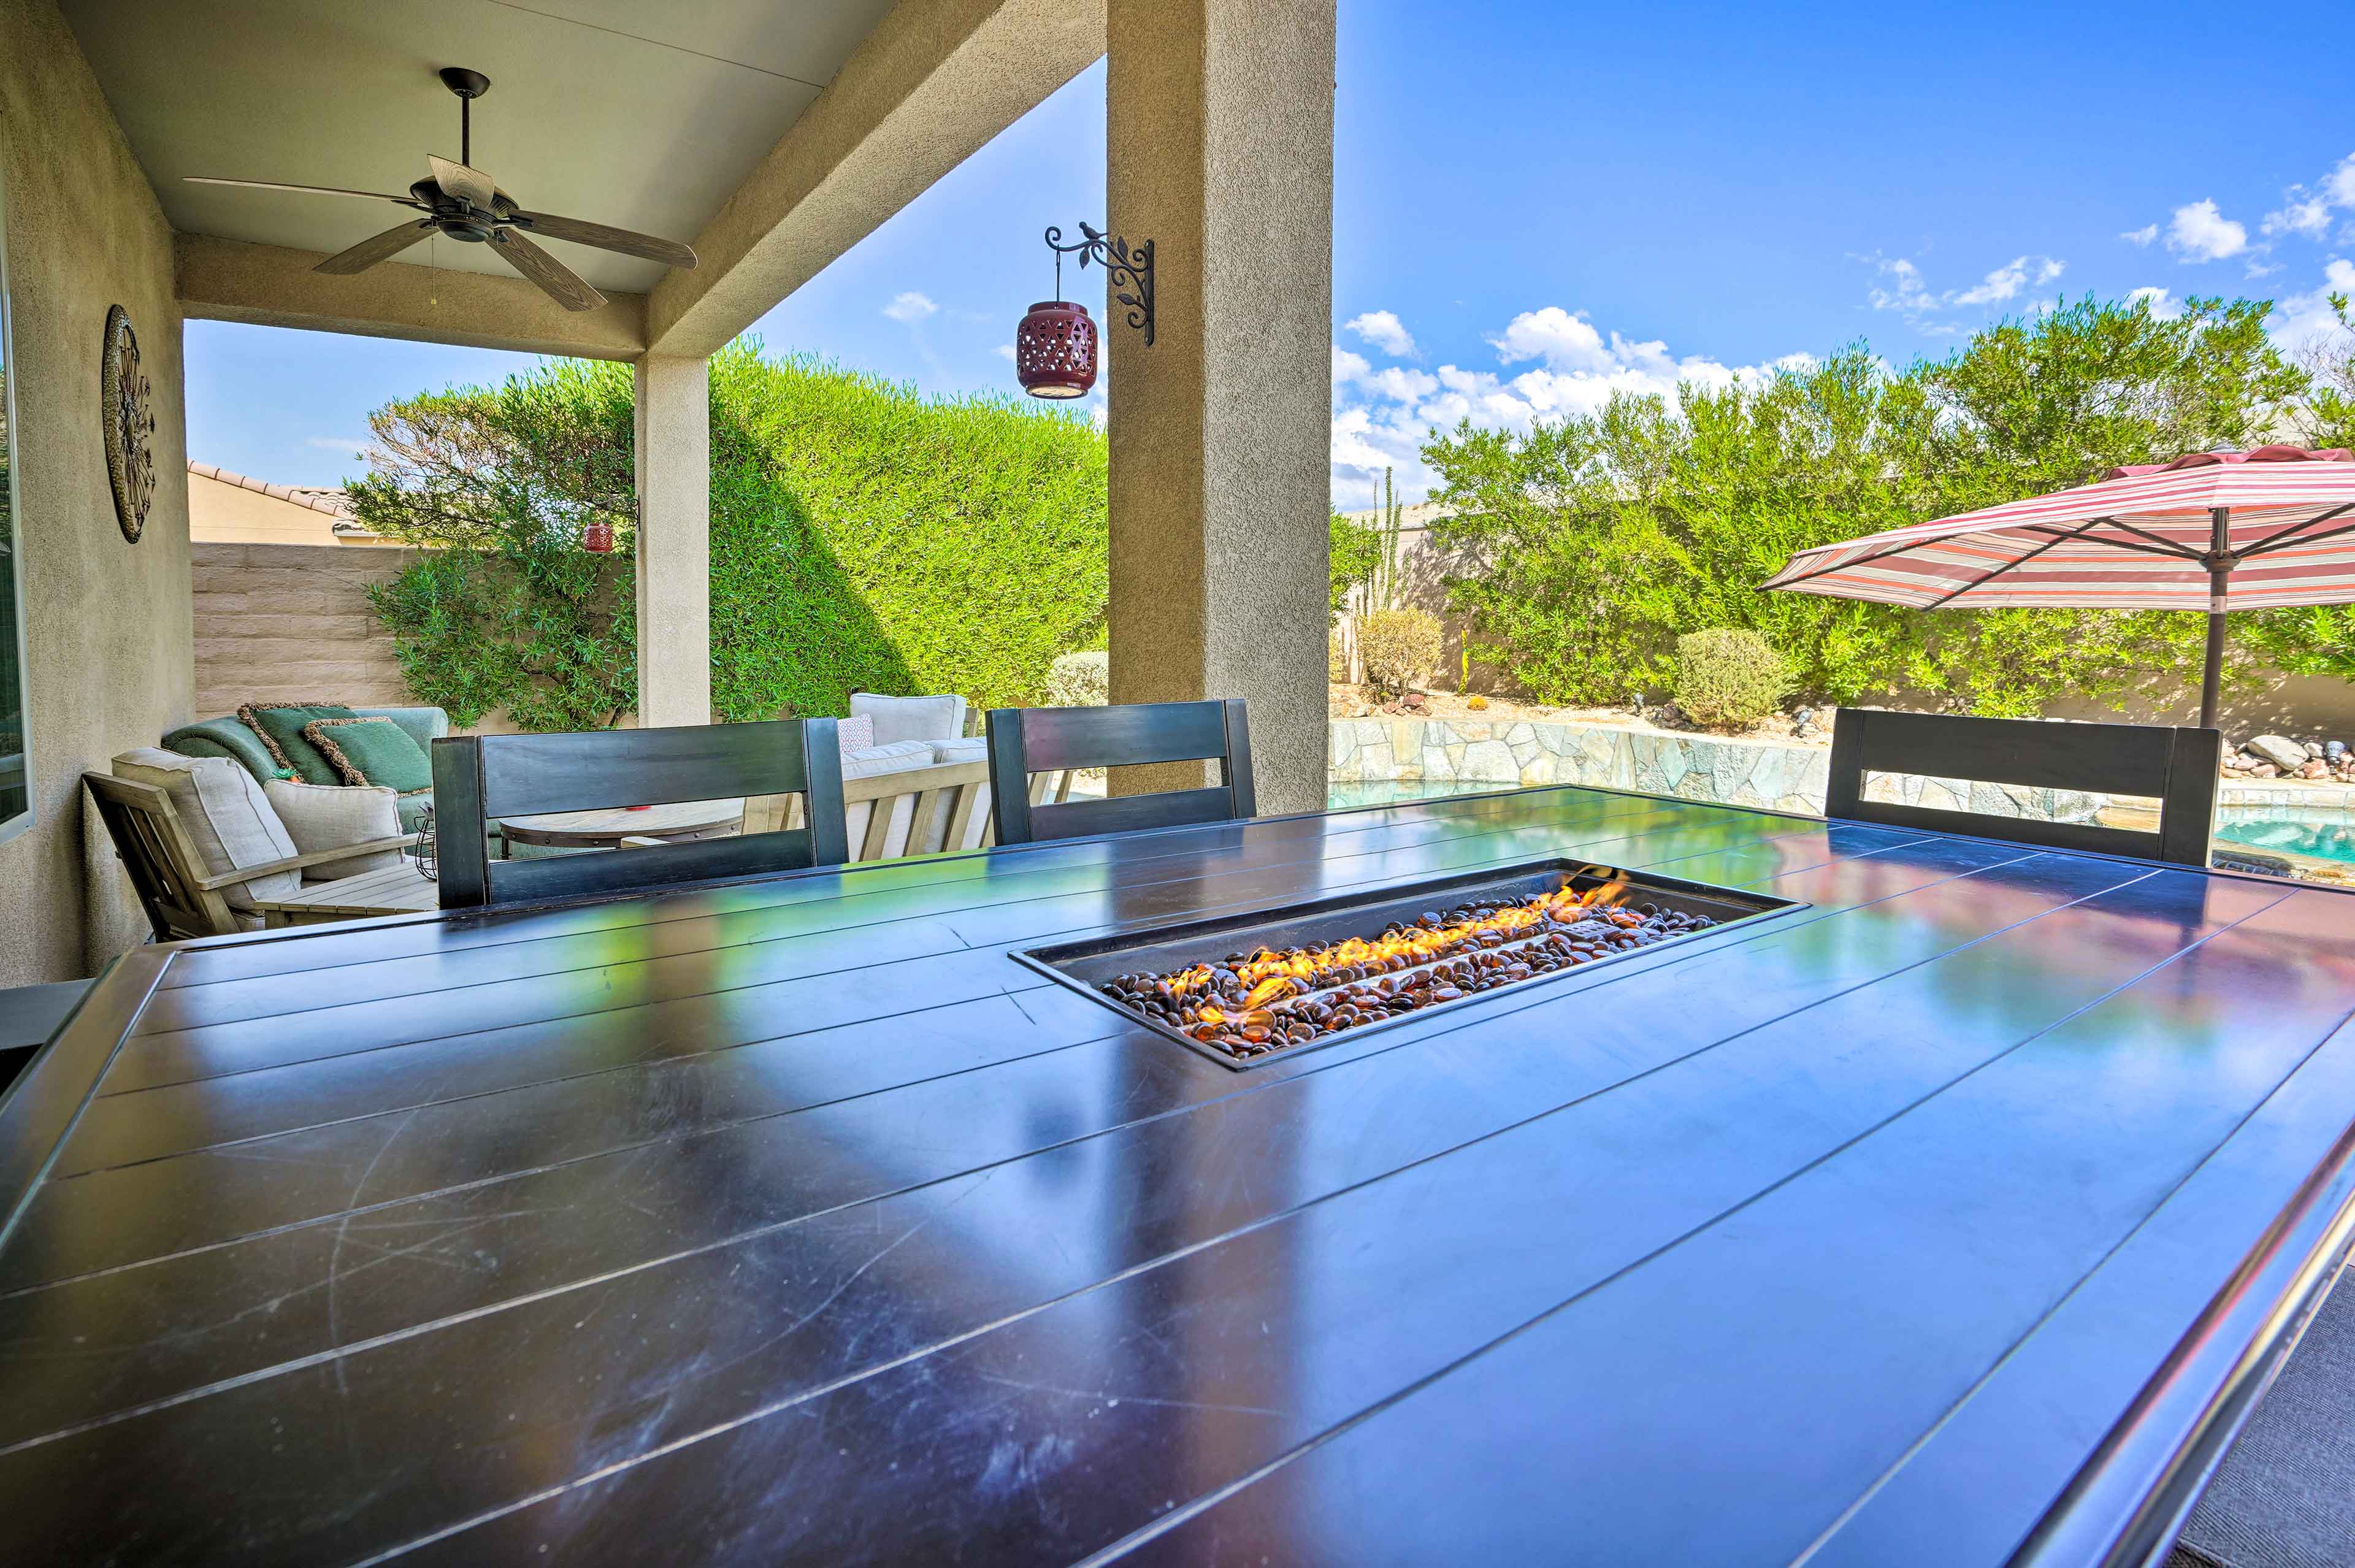 Covered Patio | Tabletop Fire Pit